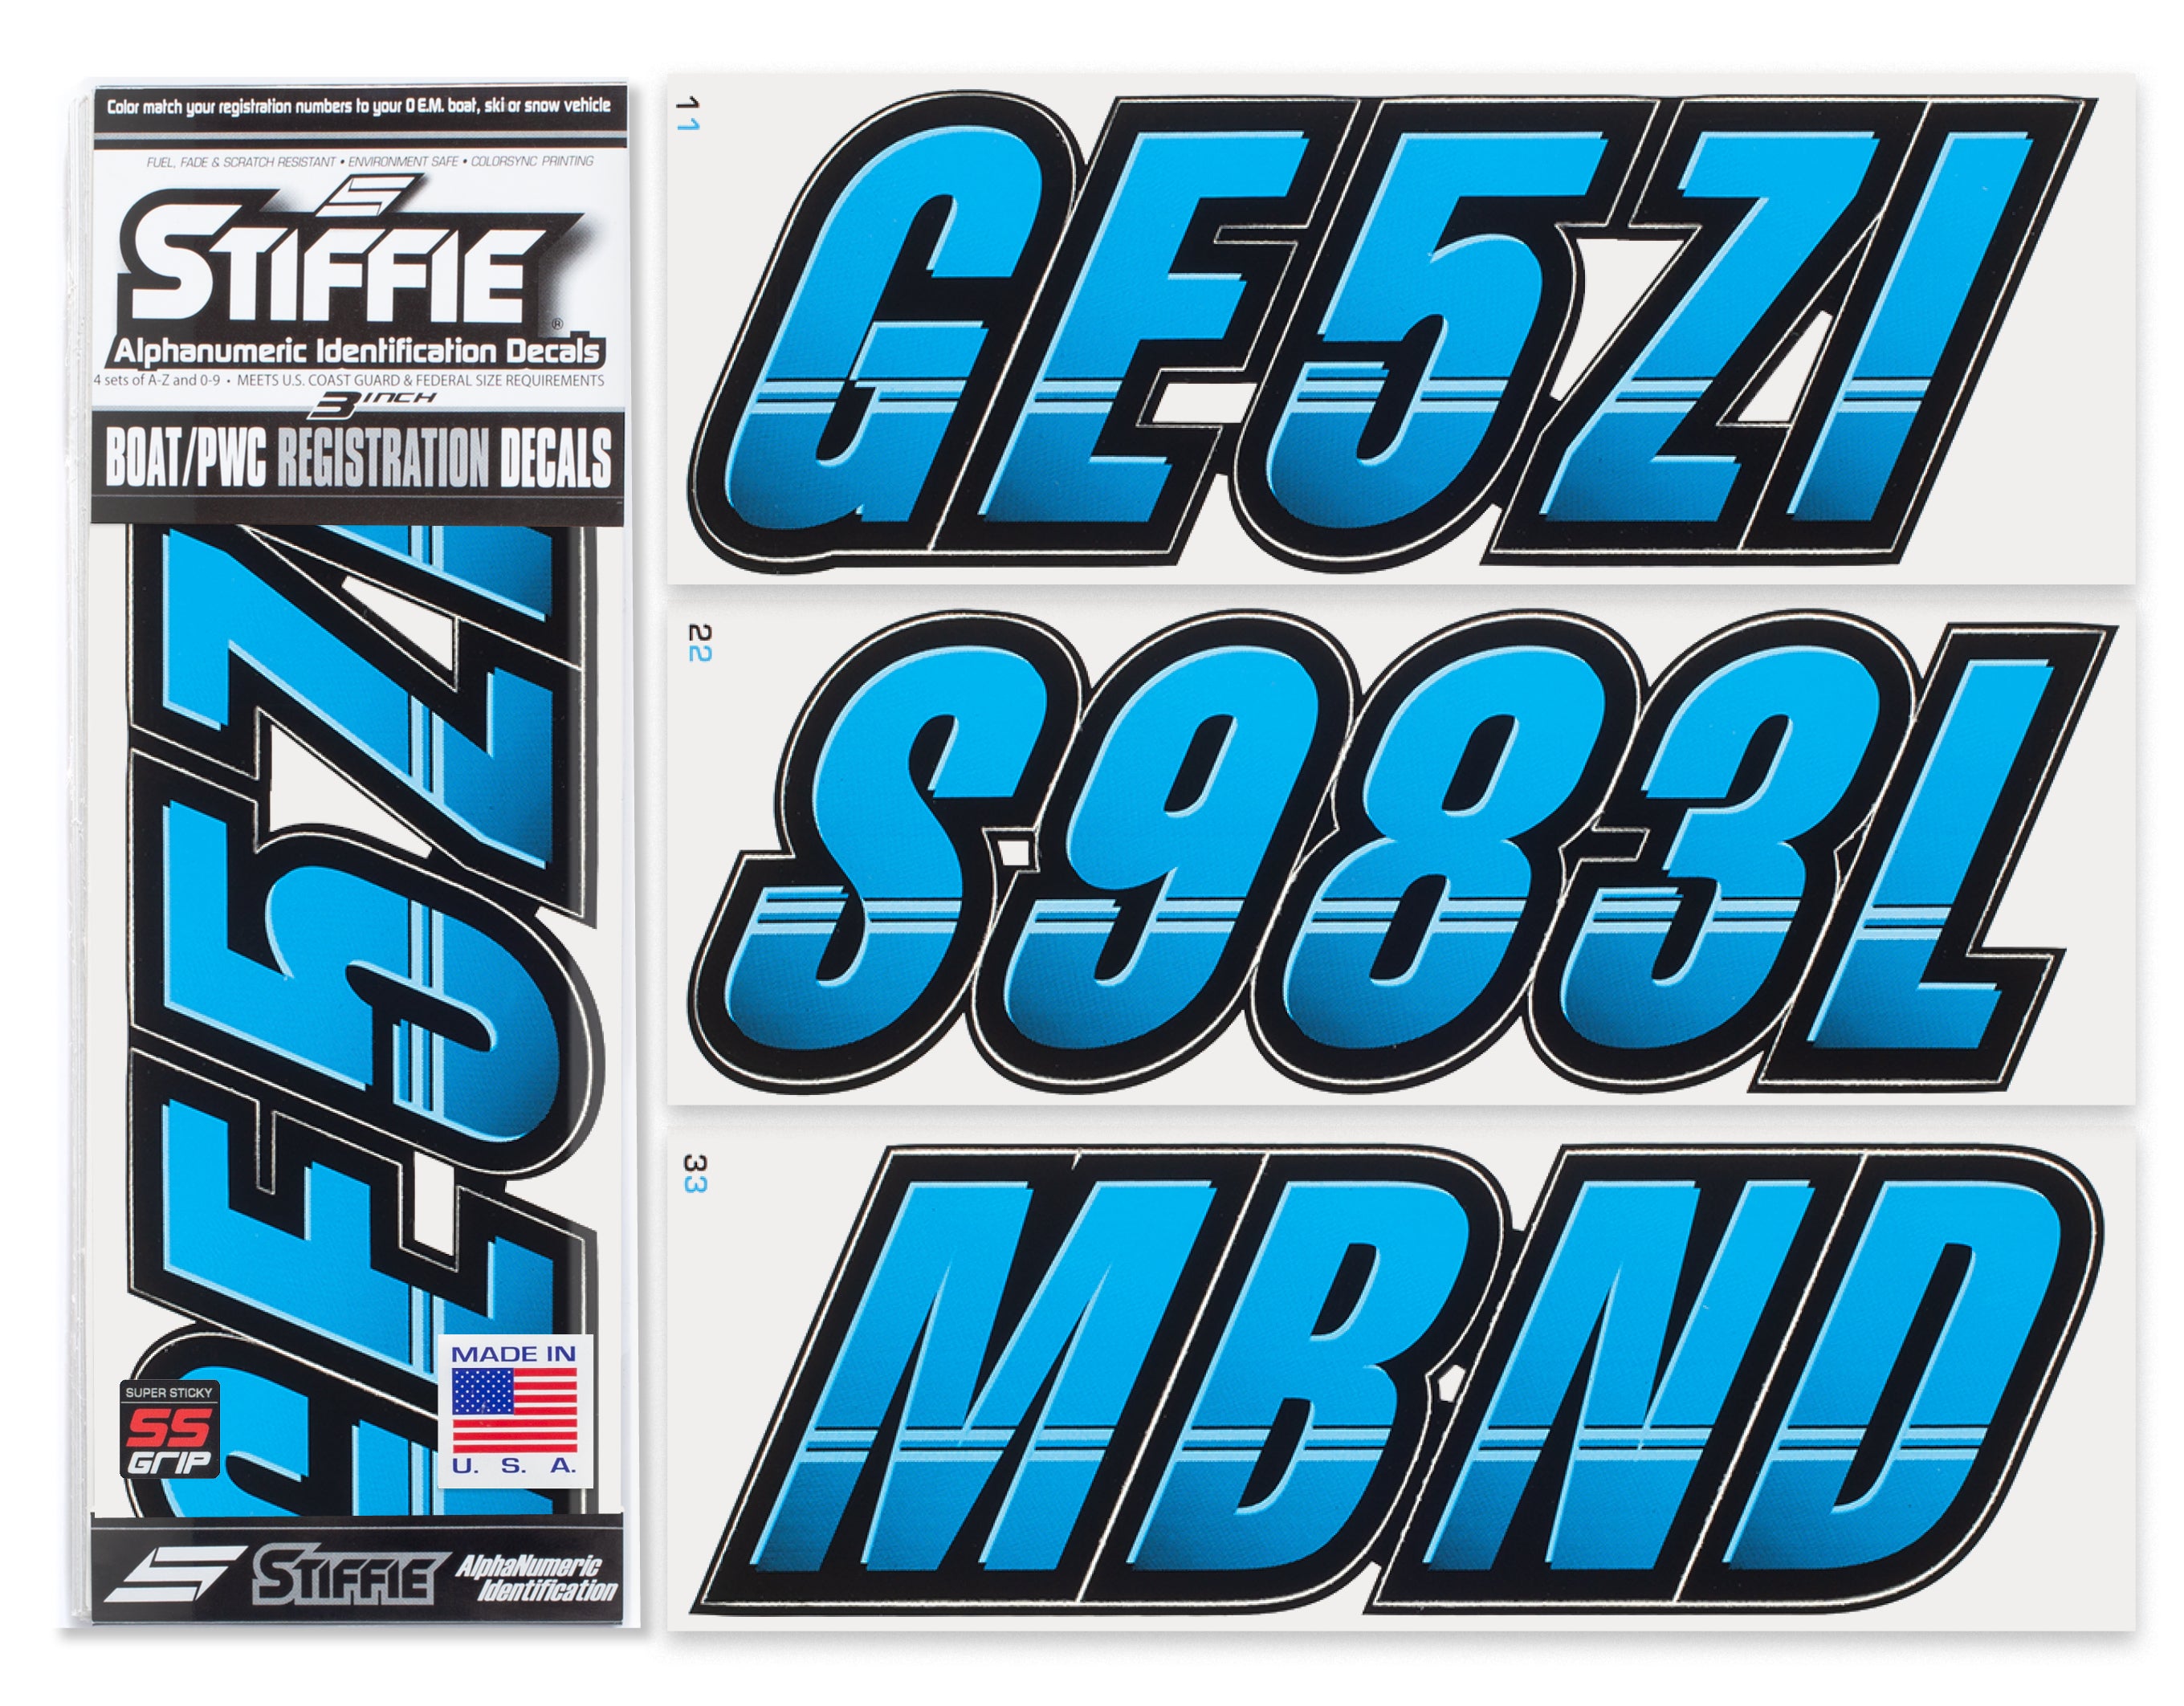 Stiffie Techtron Blueberry Blue/Black Super Sticky 3" Alpha Numeric Registration Identification Numbers Stickers Decals for Sea-Doo Spark, Inflatable Boats, Ribs, Hypalon/PVC, PWC and Boats